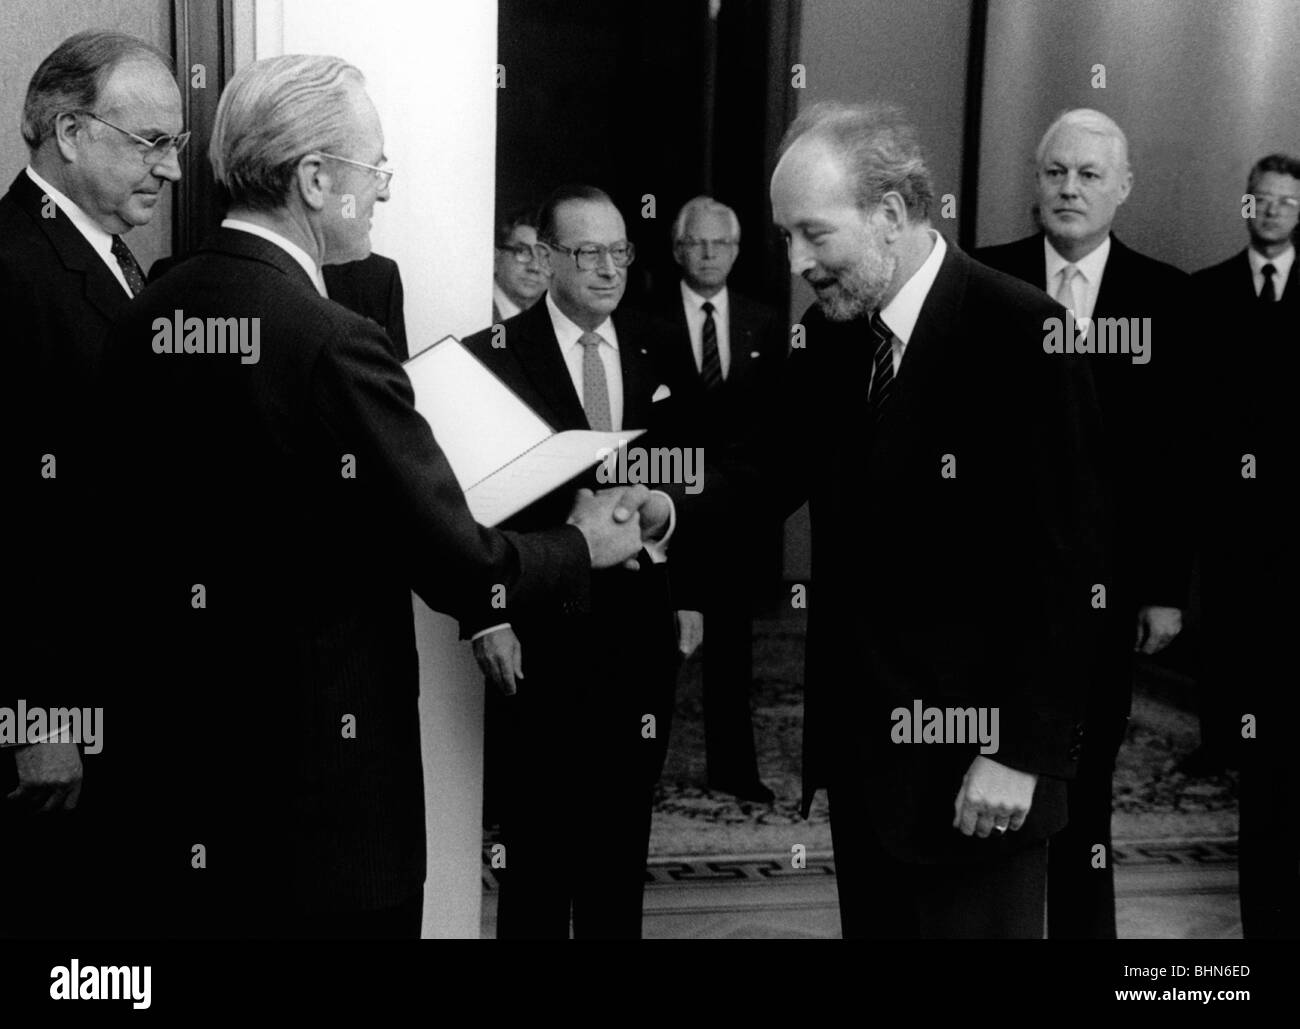 Engelhard, Hans Arnold, 16.3.1934 - 11.3.2008, German politician (FDP), Federal Minister of Justice 4.10.1982 - 18.1.1991, appointment, Bonn, Germany, Villa Hammerschmidt, handshake with the President of Germany Karl Carstens, Stock Photo